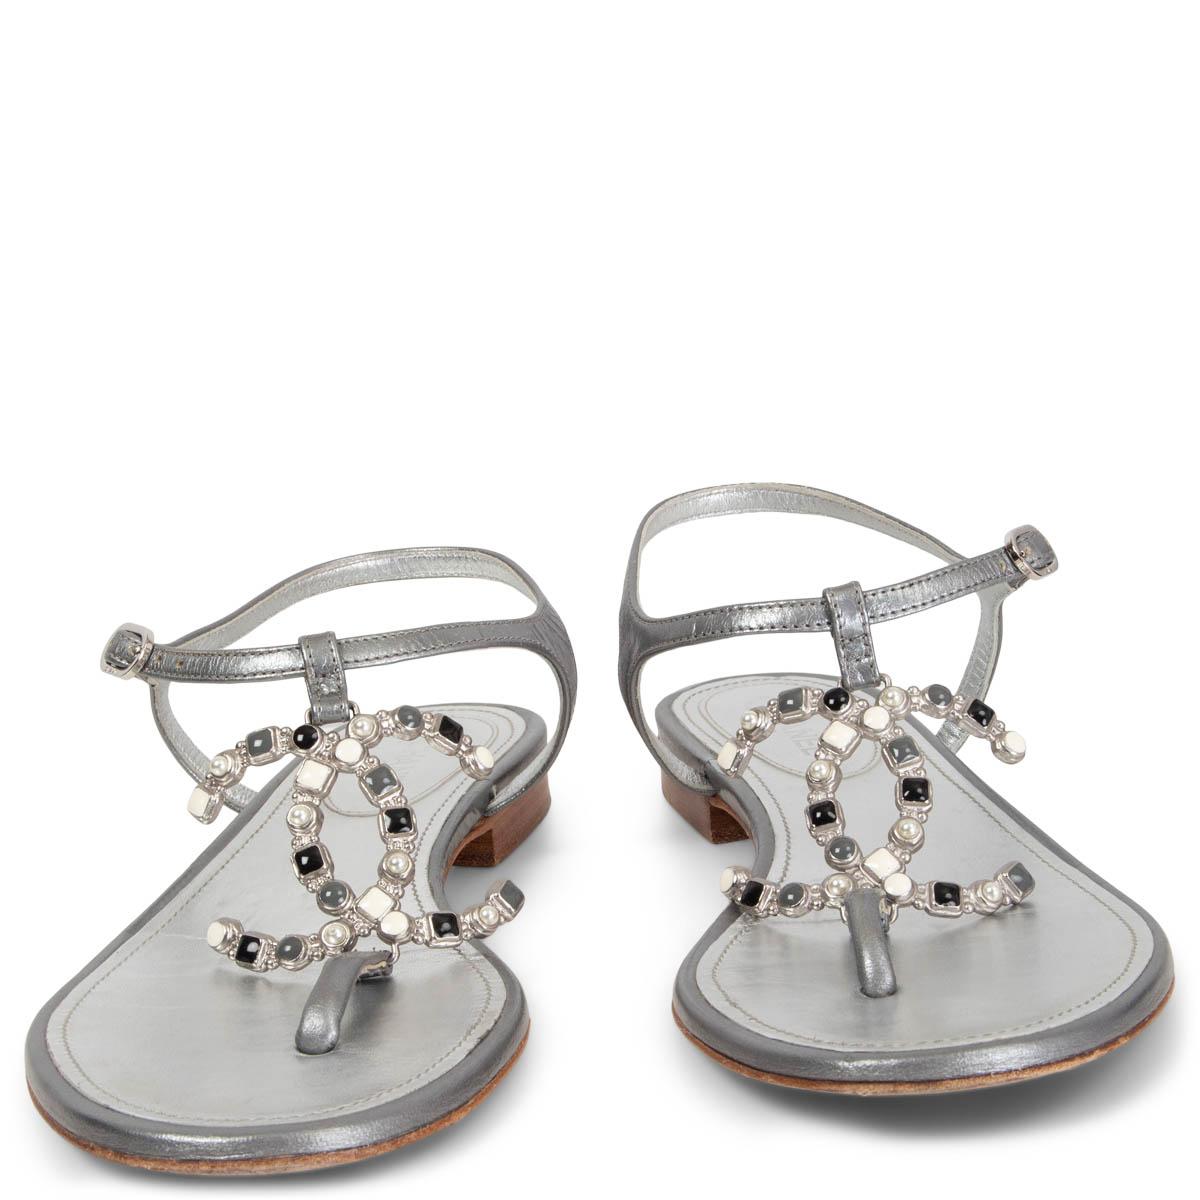 100% authentic Chanel 2019 Stone Embellished CC Flat T-Strap Sandals in metallic silver leather featuring black, white and grey stone and pearl embellished CC buckle. Have been worn and are in excellent condition.